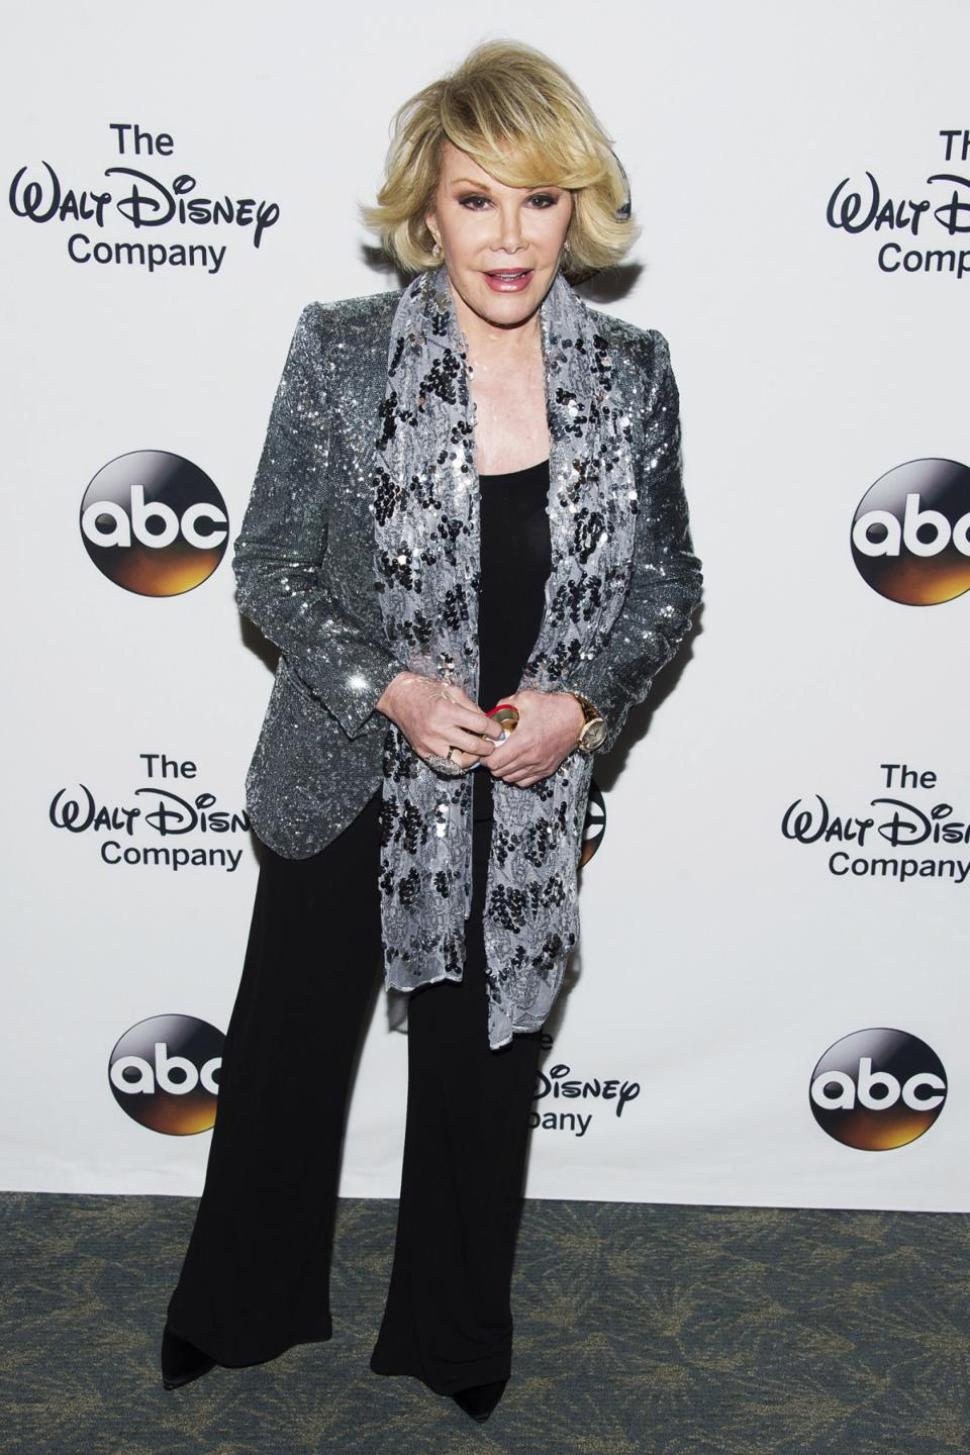 Joan Rivers was hospitalized after she stopped breathing during surgery on Thursday.